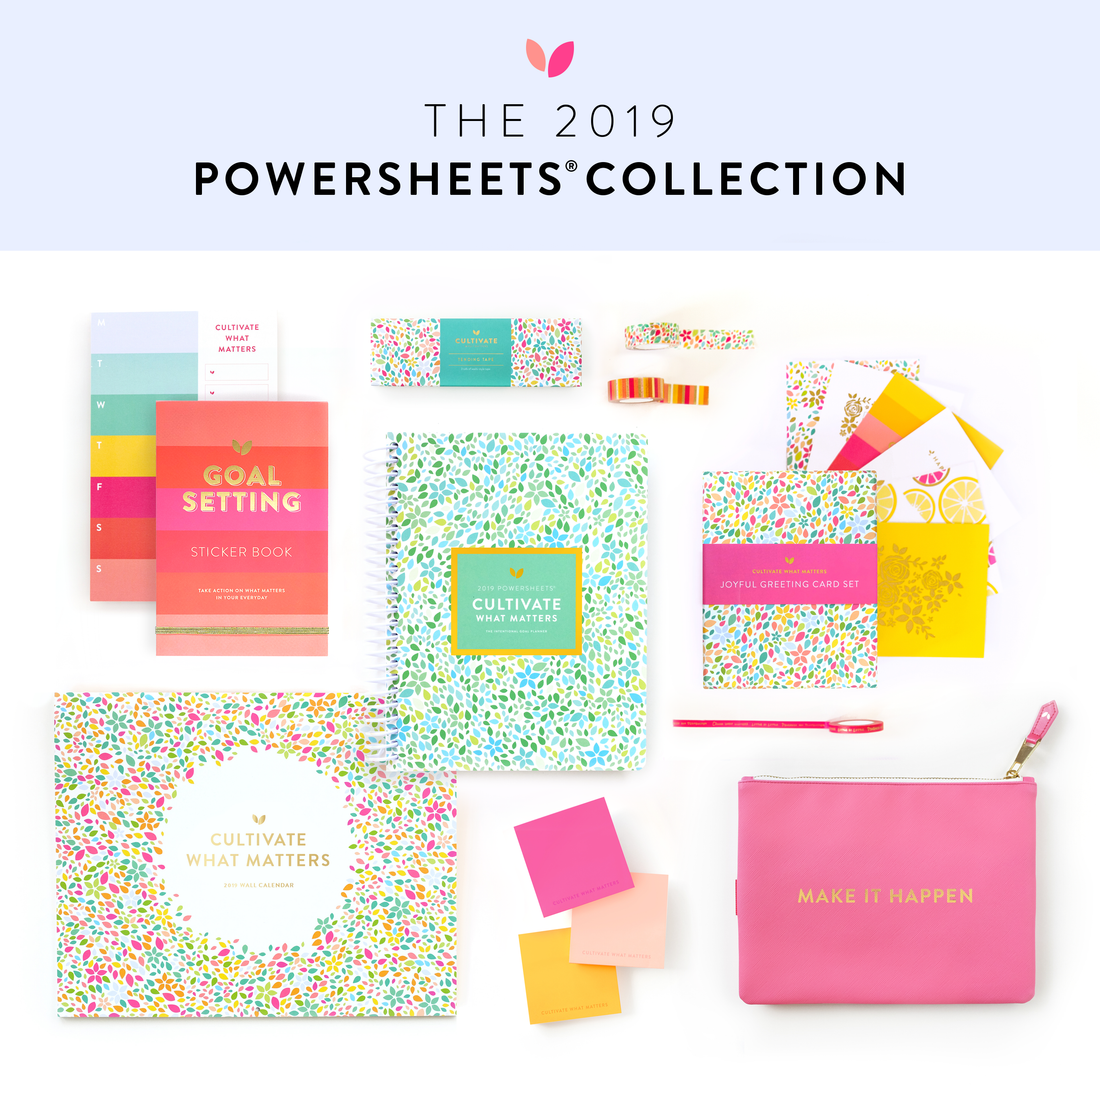 The 2019 PowerSheets Collection Reveal